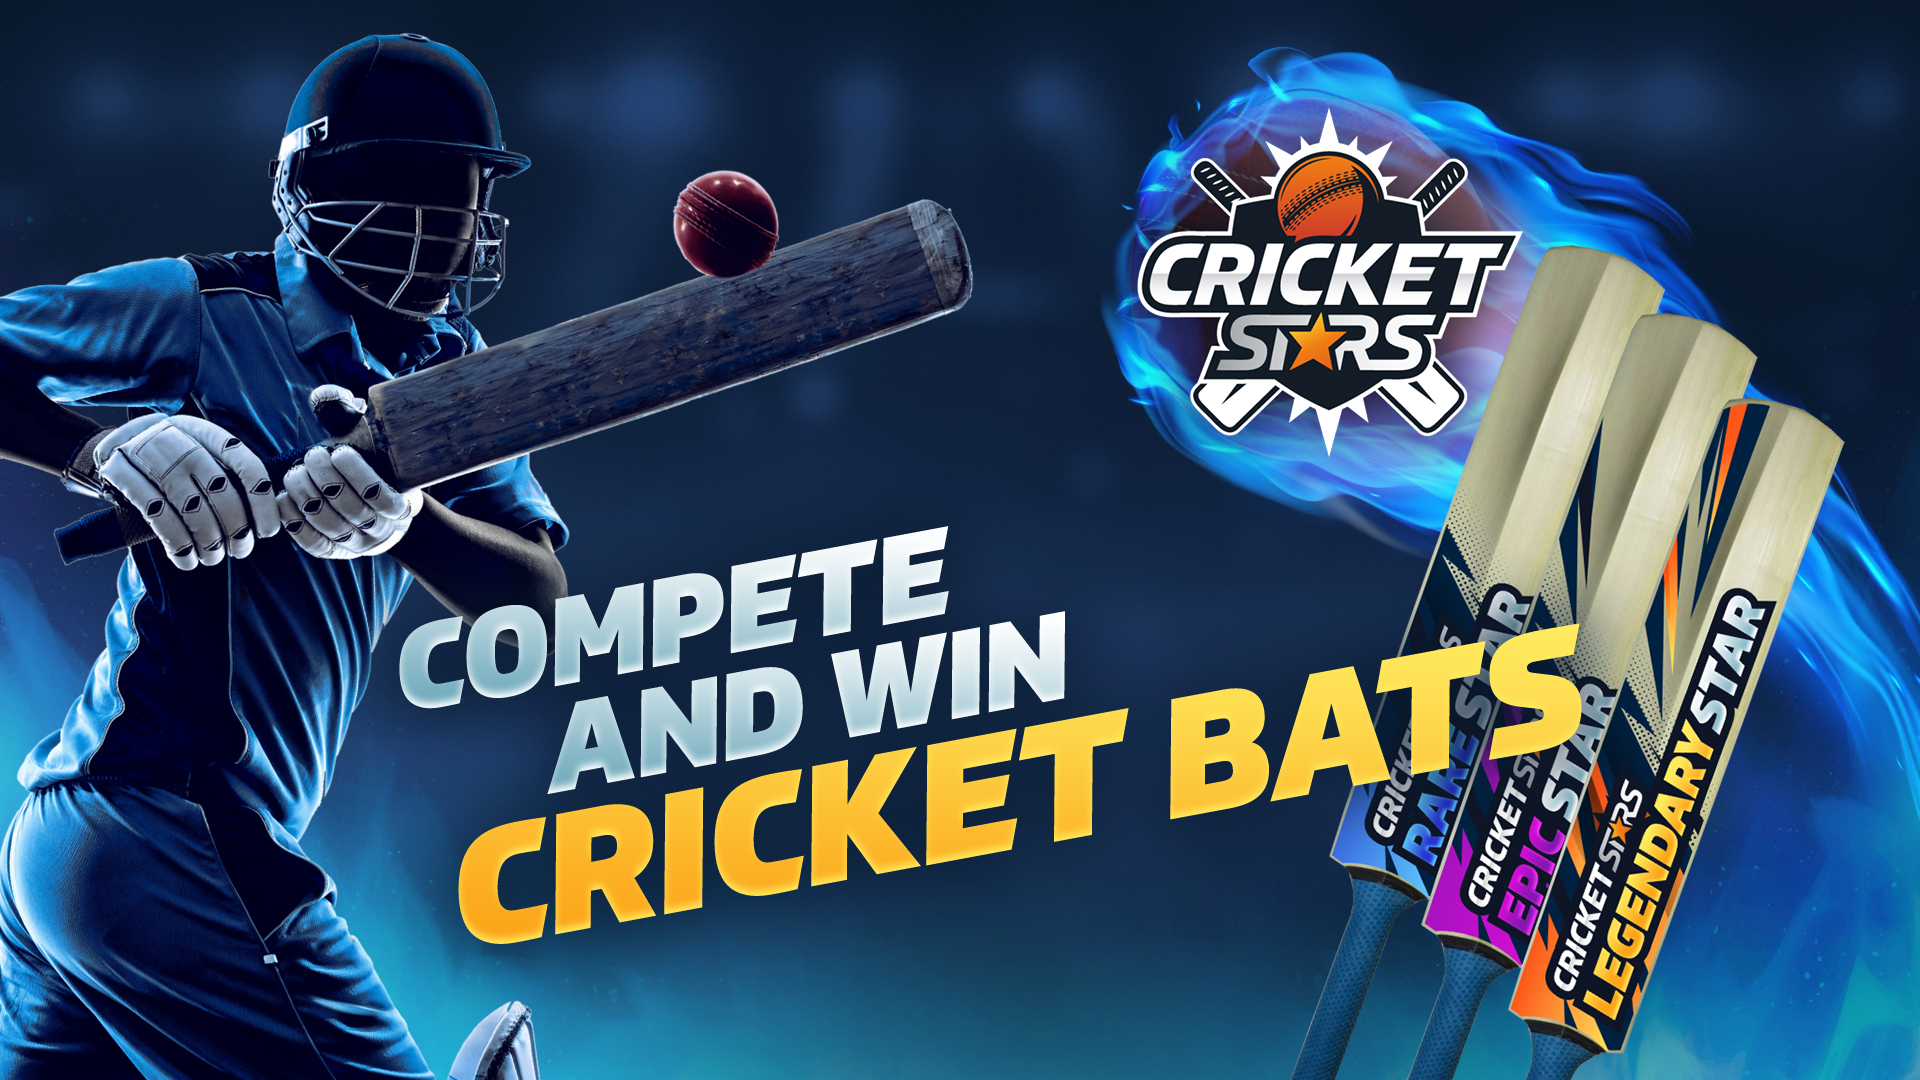 GoLive Games launches the first NFT based cricket strategy game 